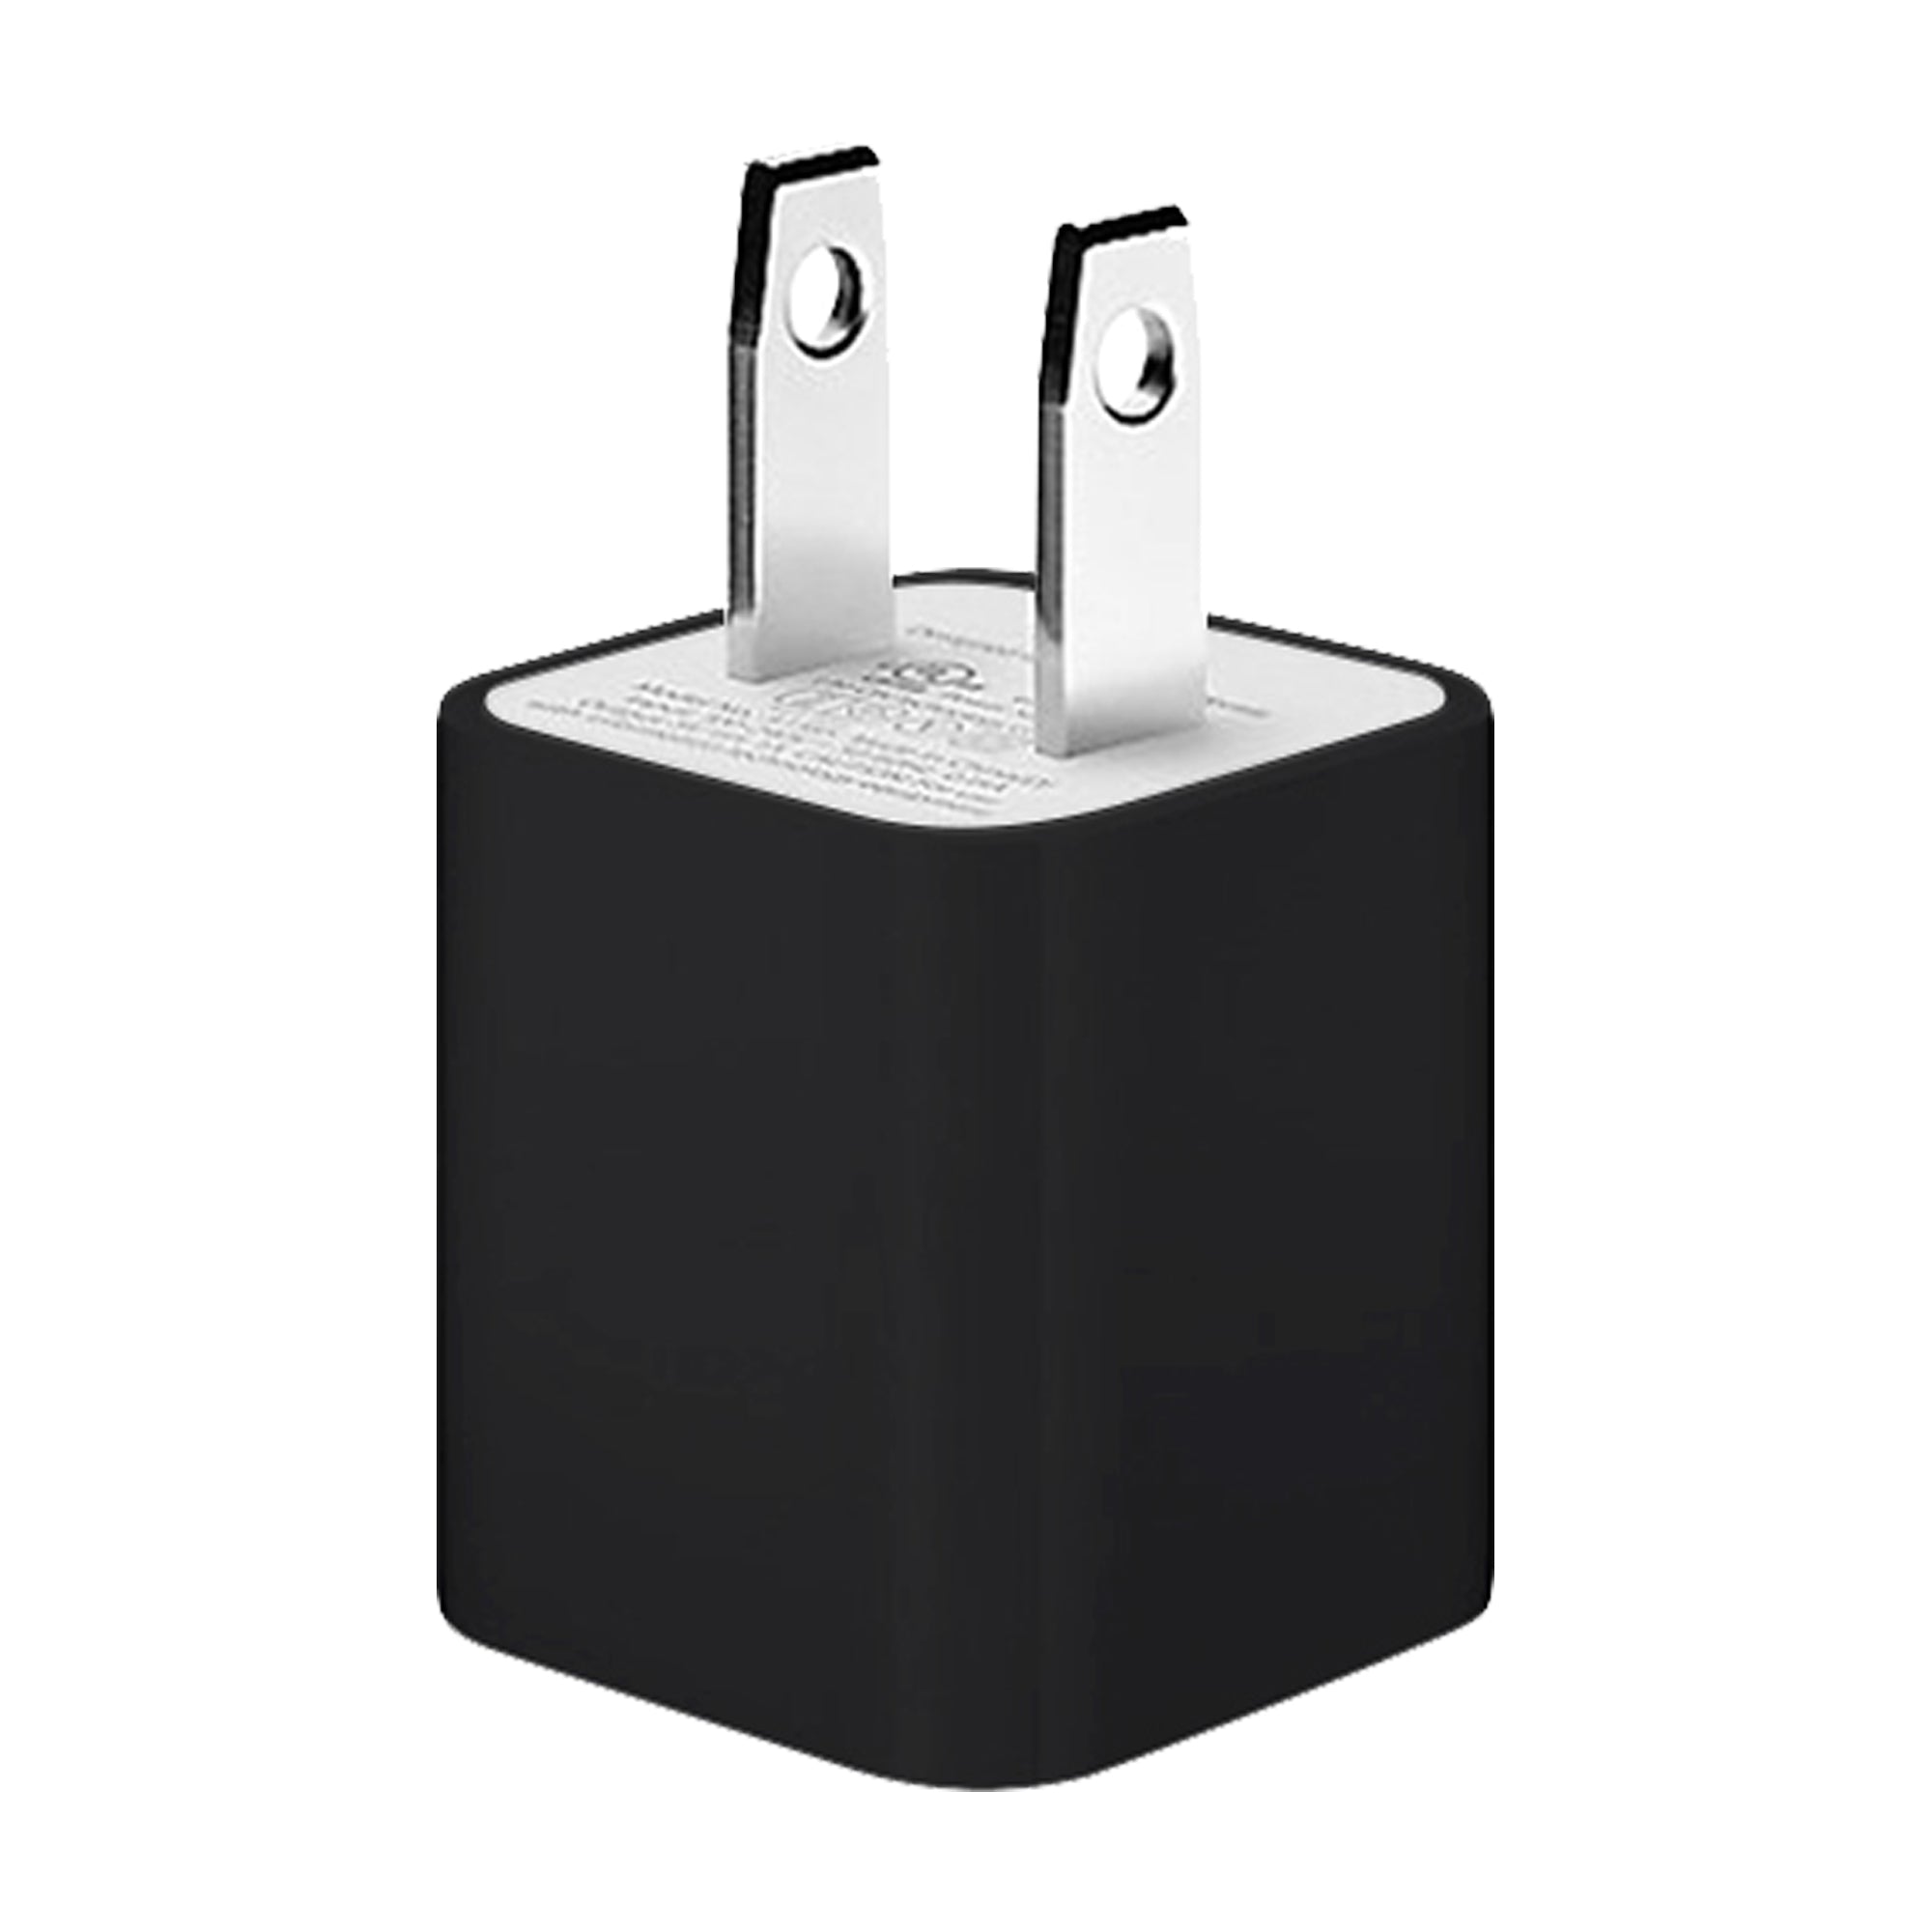 iTouch Charging Cube: Black affordable charger